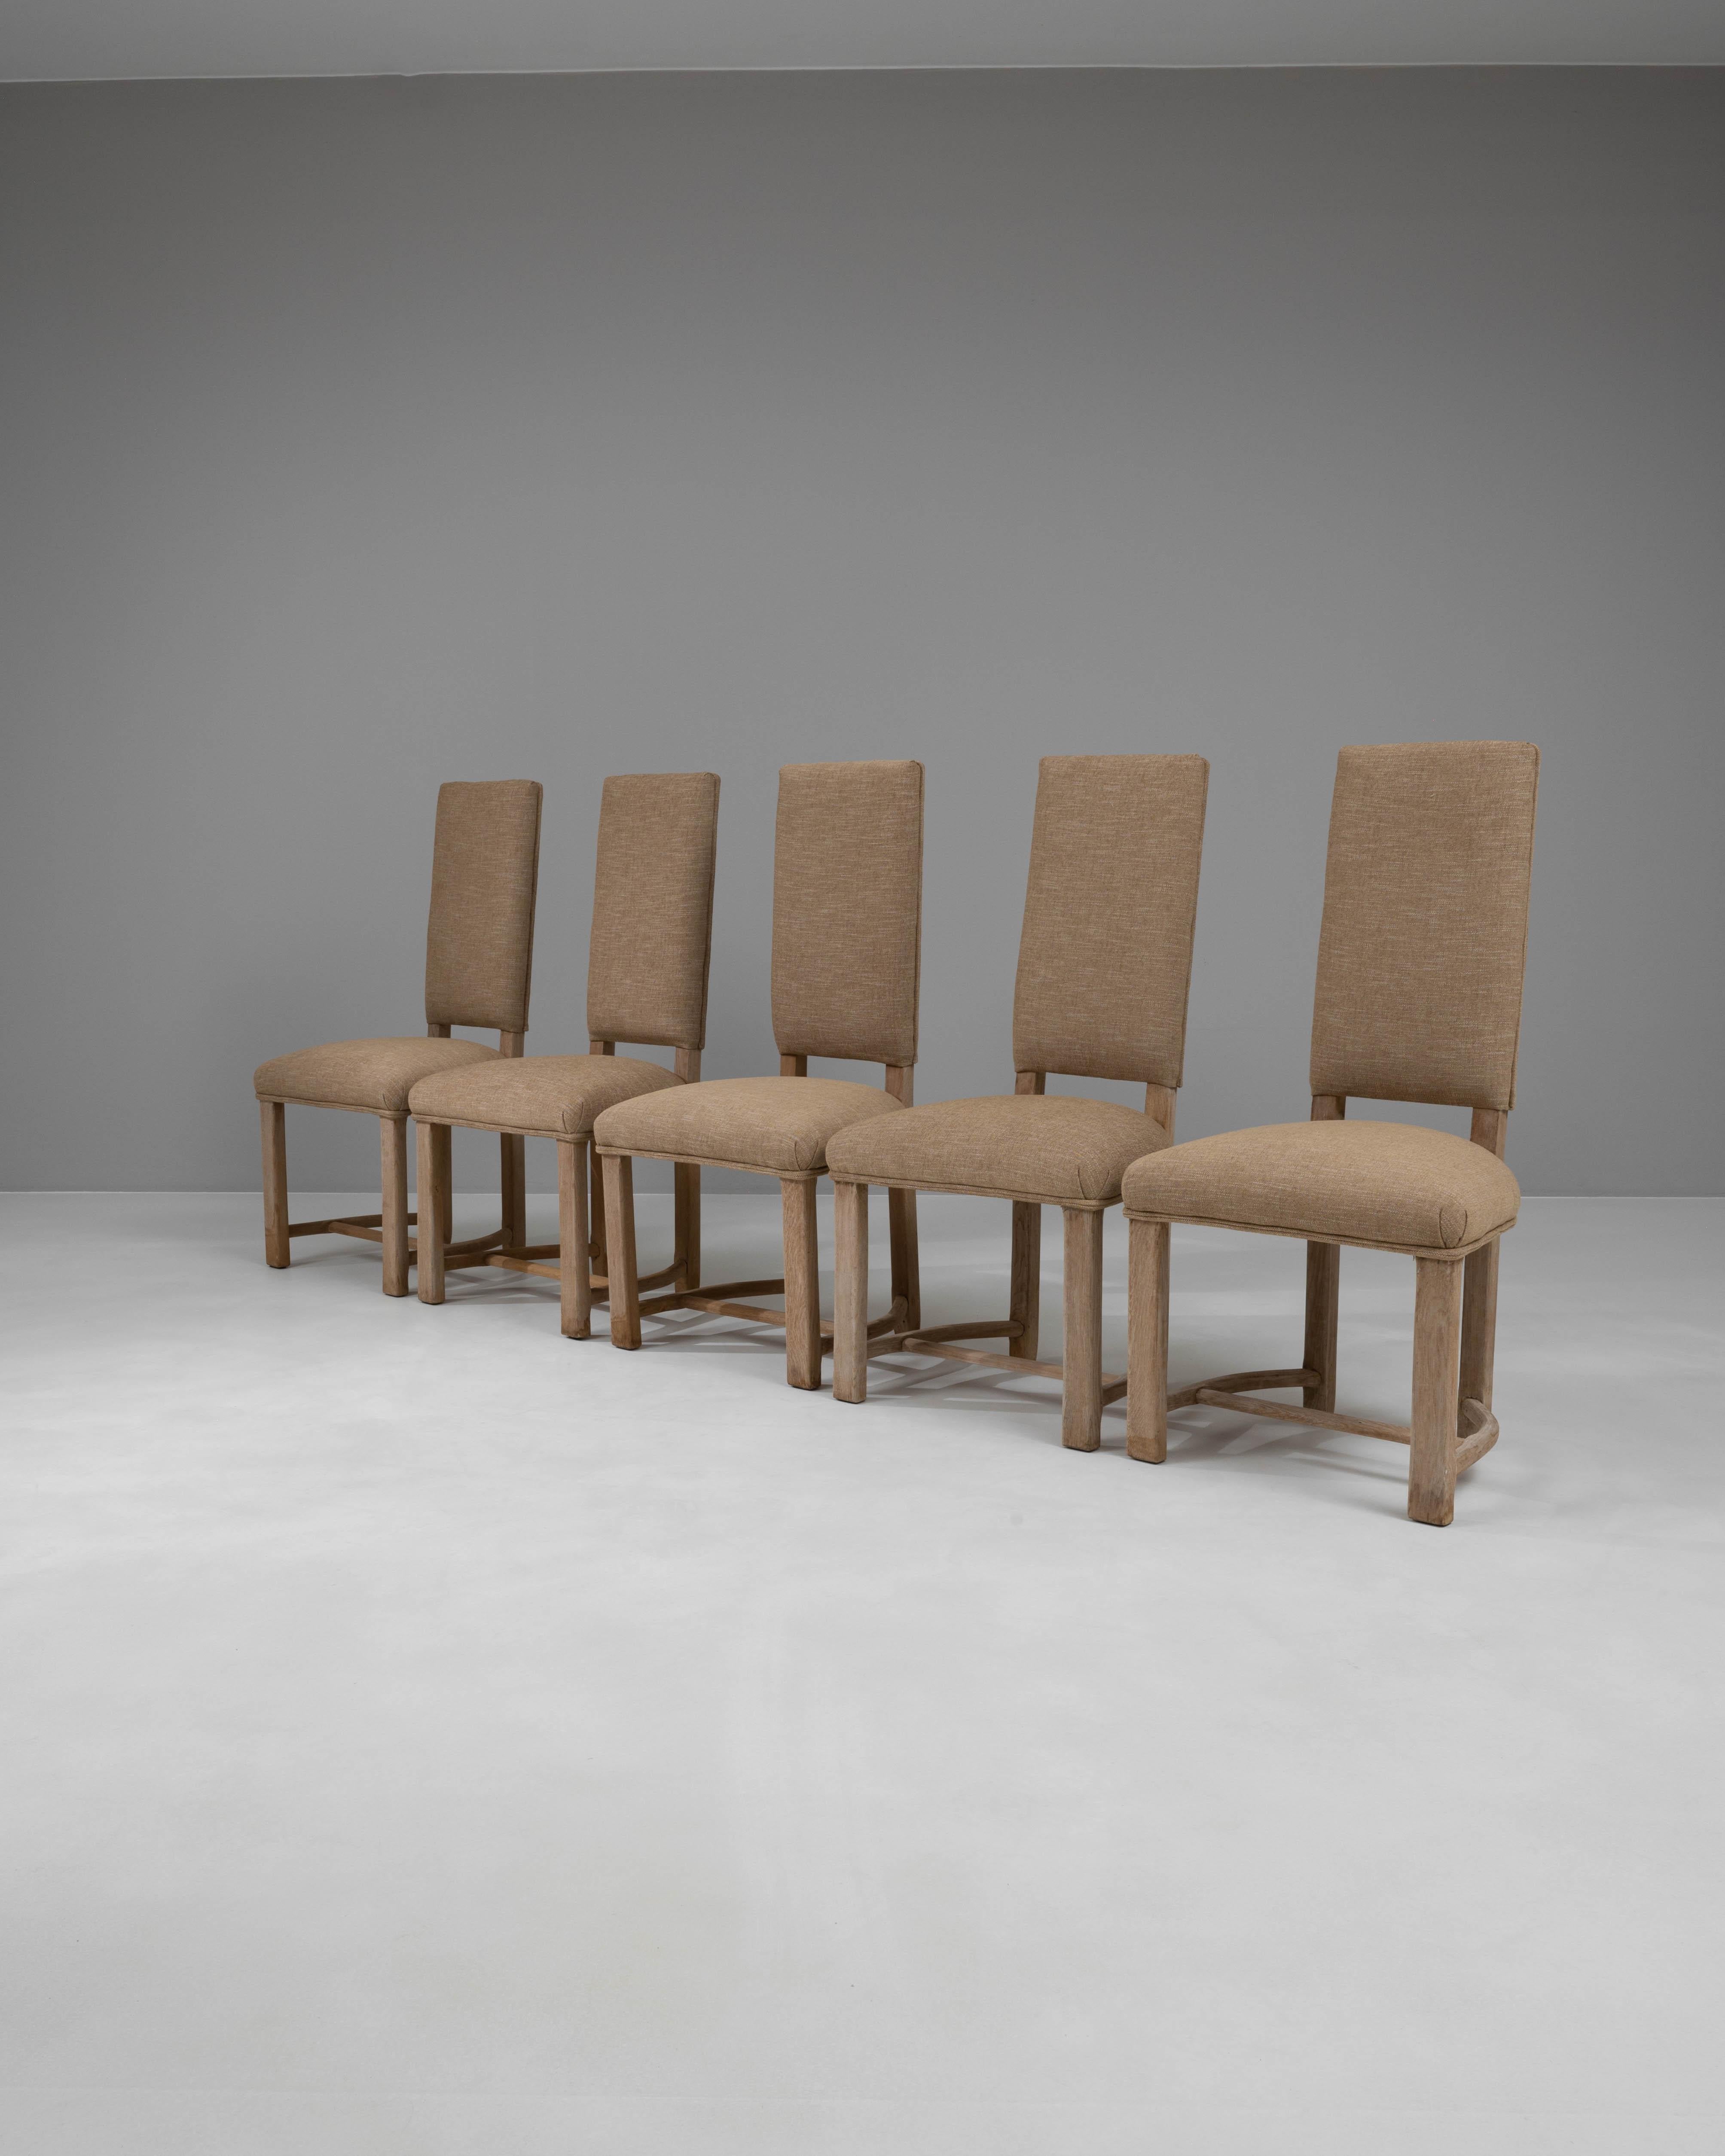 20th Century French Bleached Oak Dining Chairs With Upholstered Seats And Backs For Sale 4